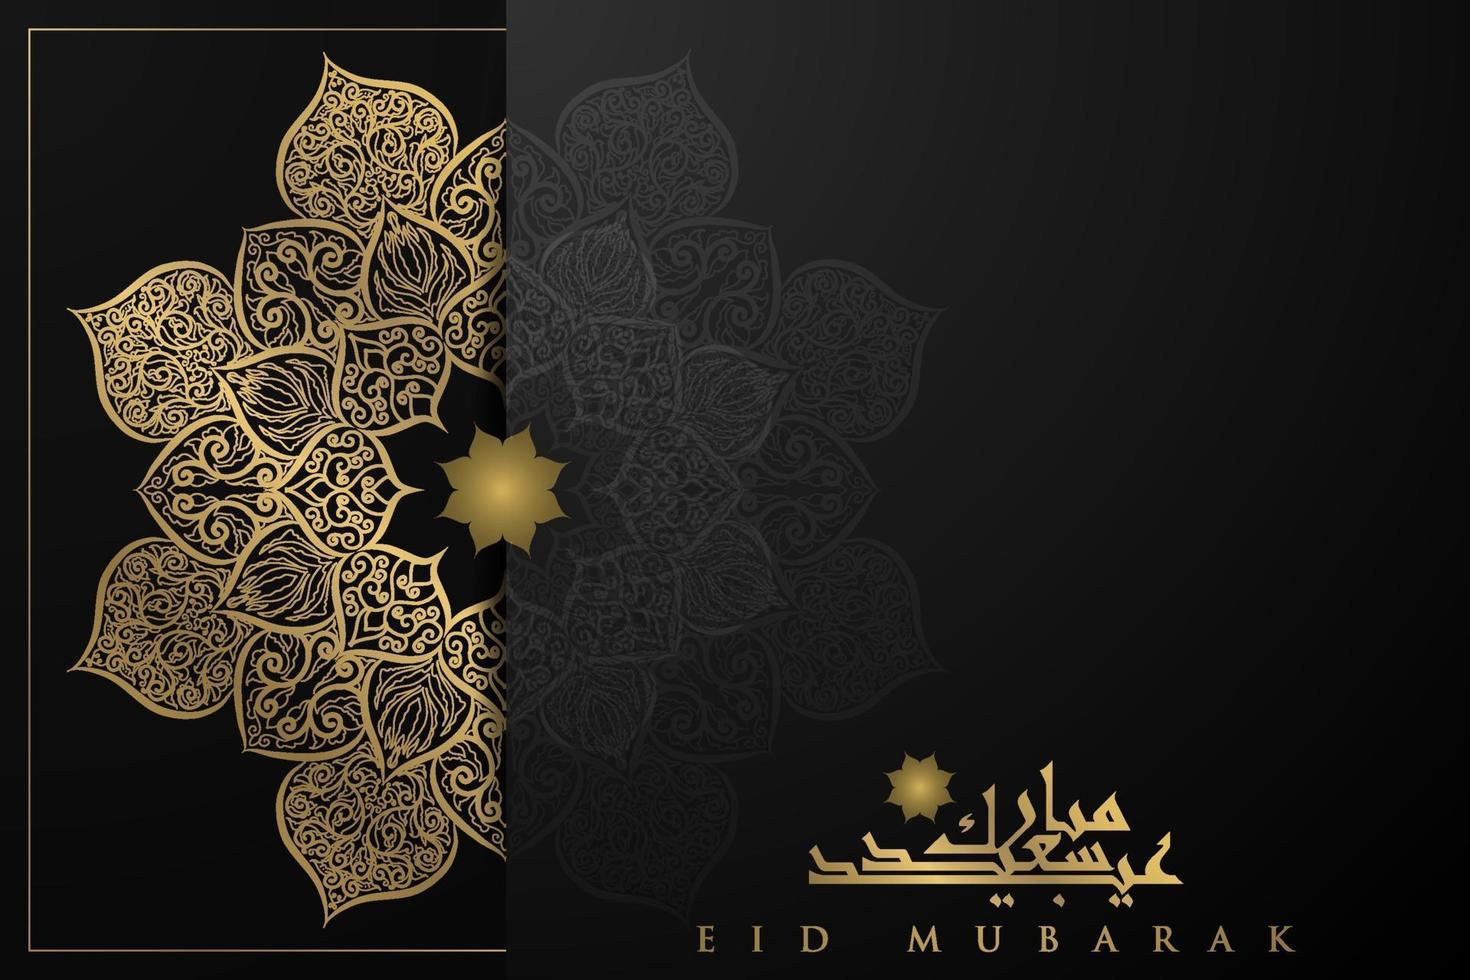 Eid Mubarak Greeting background Islamic pattern vector design with beautiful arabic calligraphy. translation of text Blessed Festival